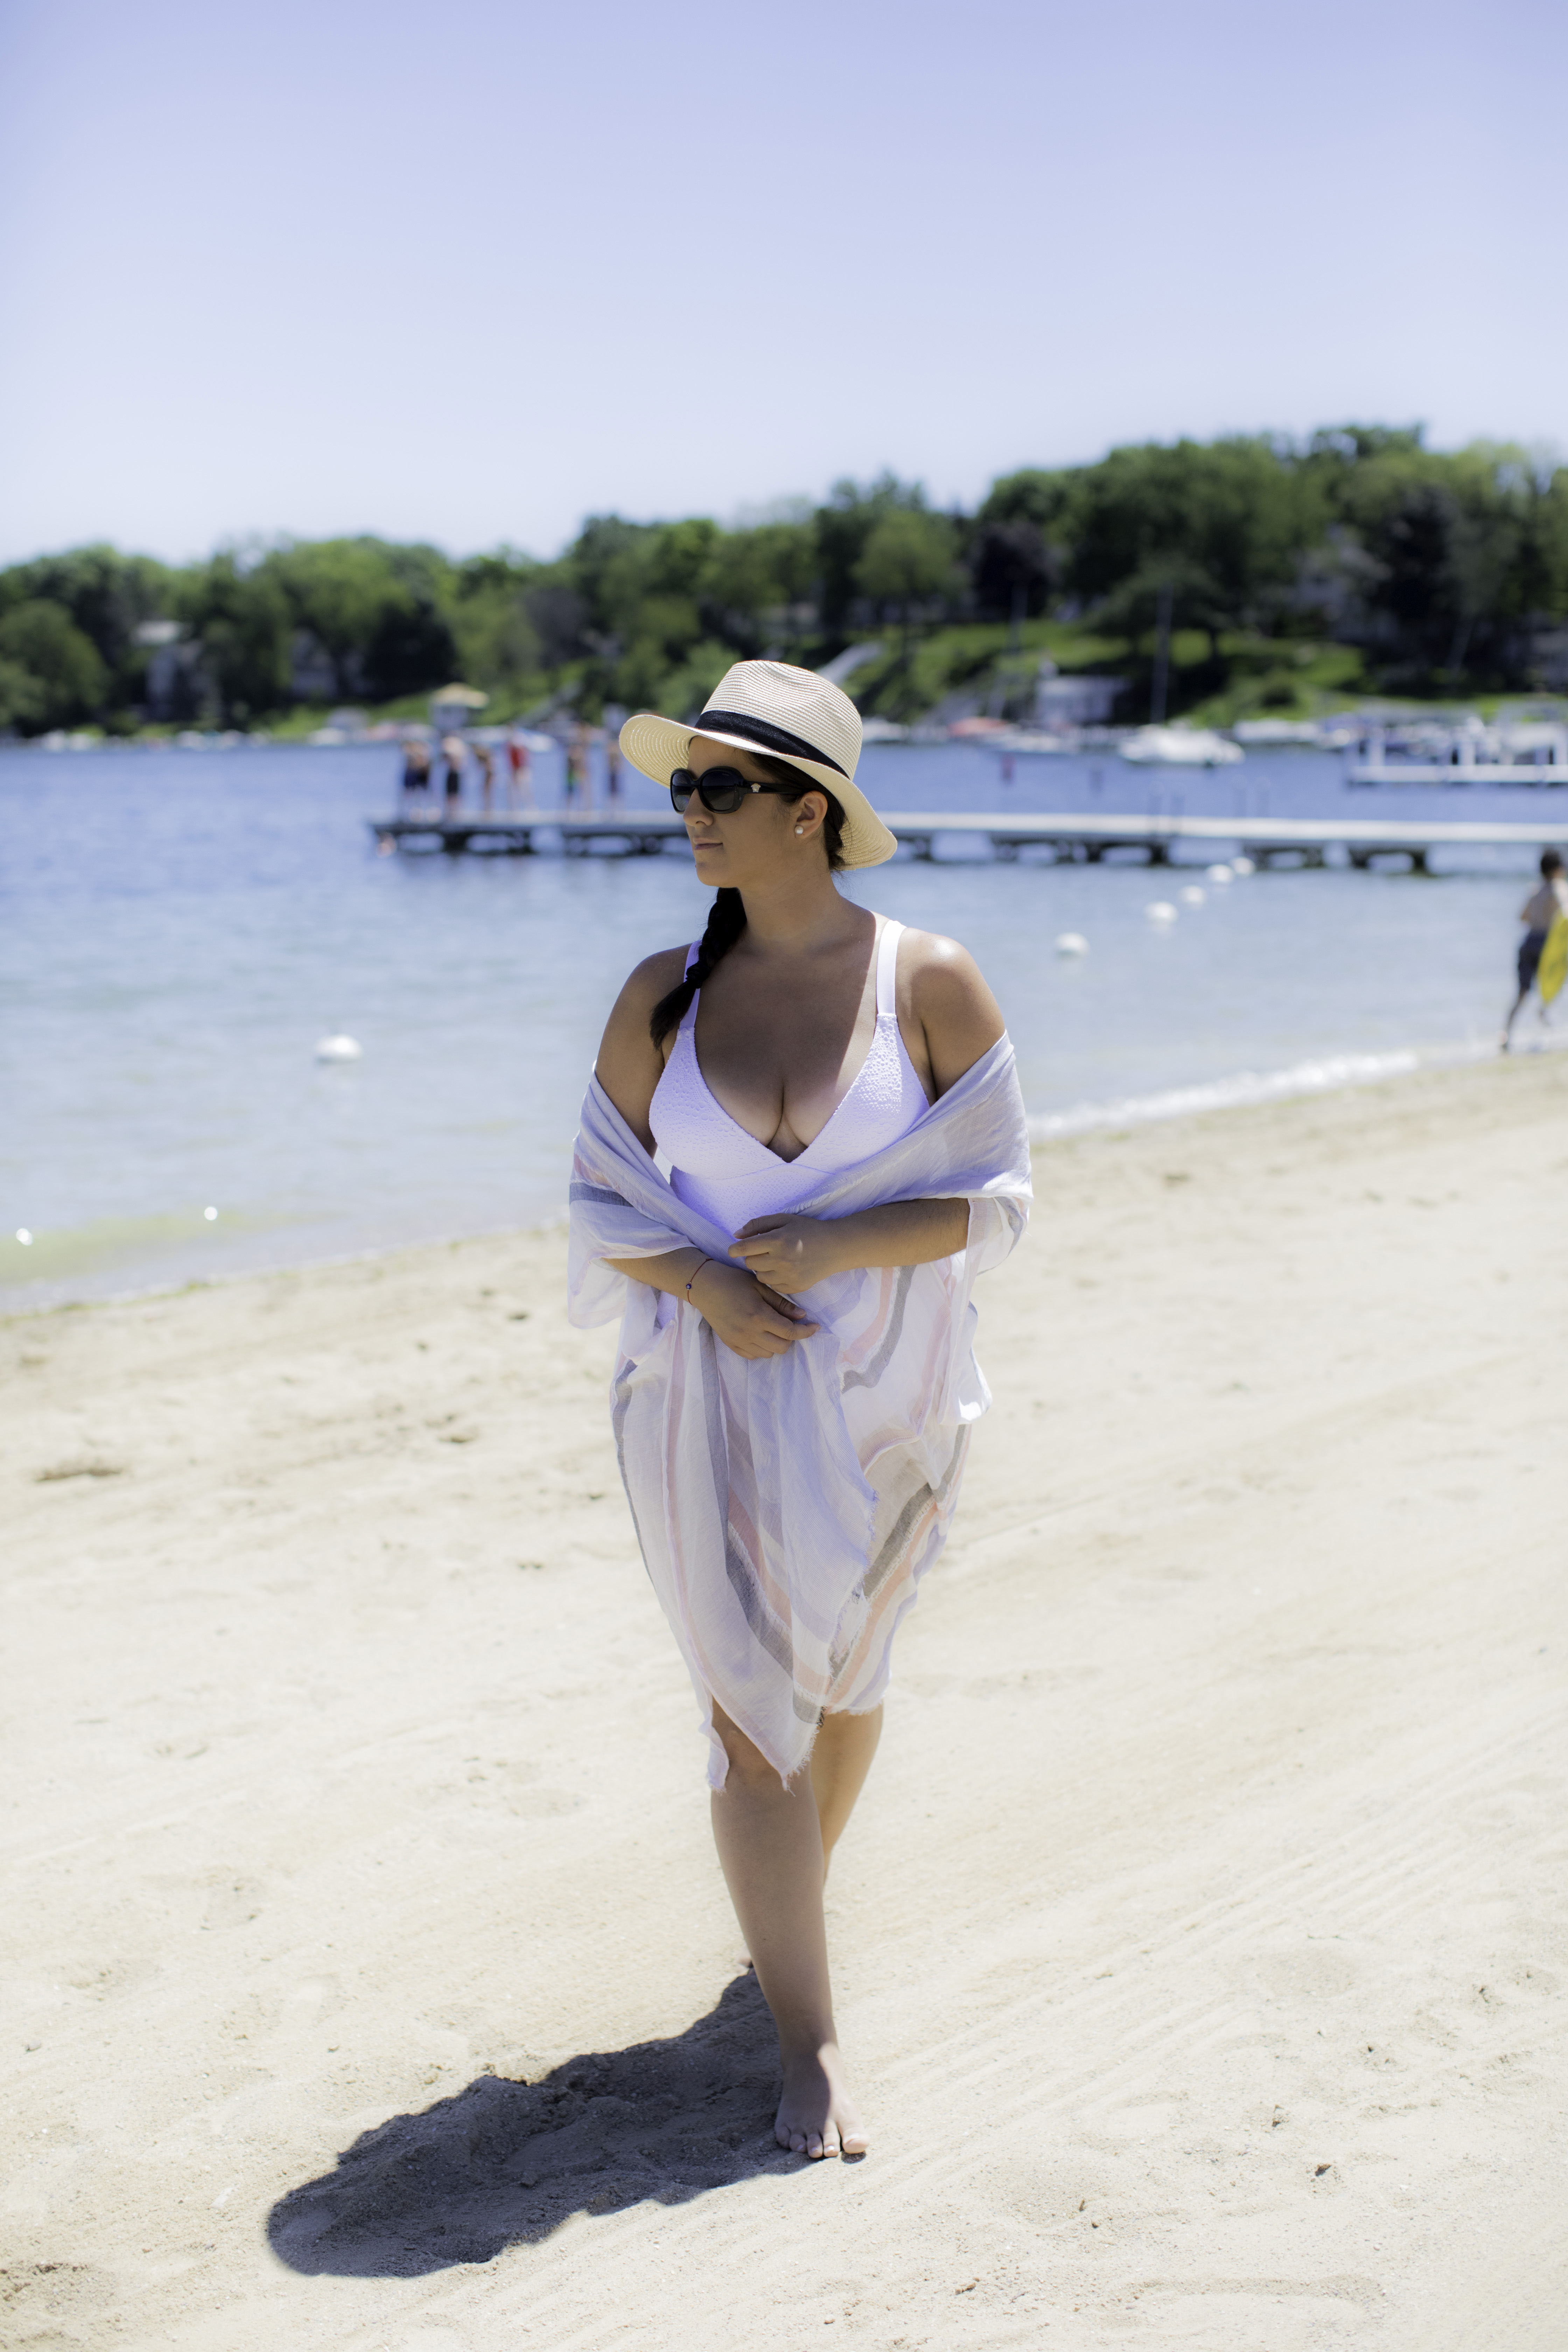 Preparing your skin for a day by the water, #FreshSummerSkin, #ad, #Target #Neutrogena